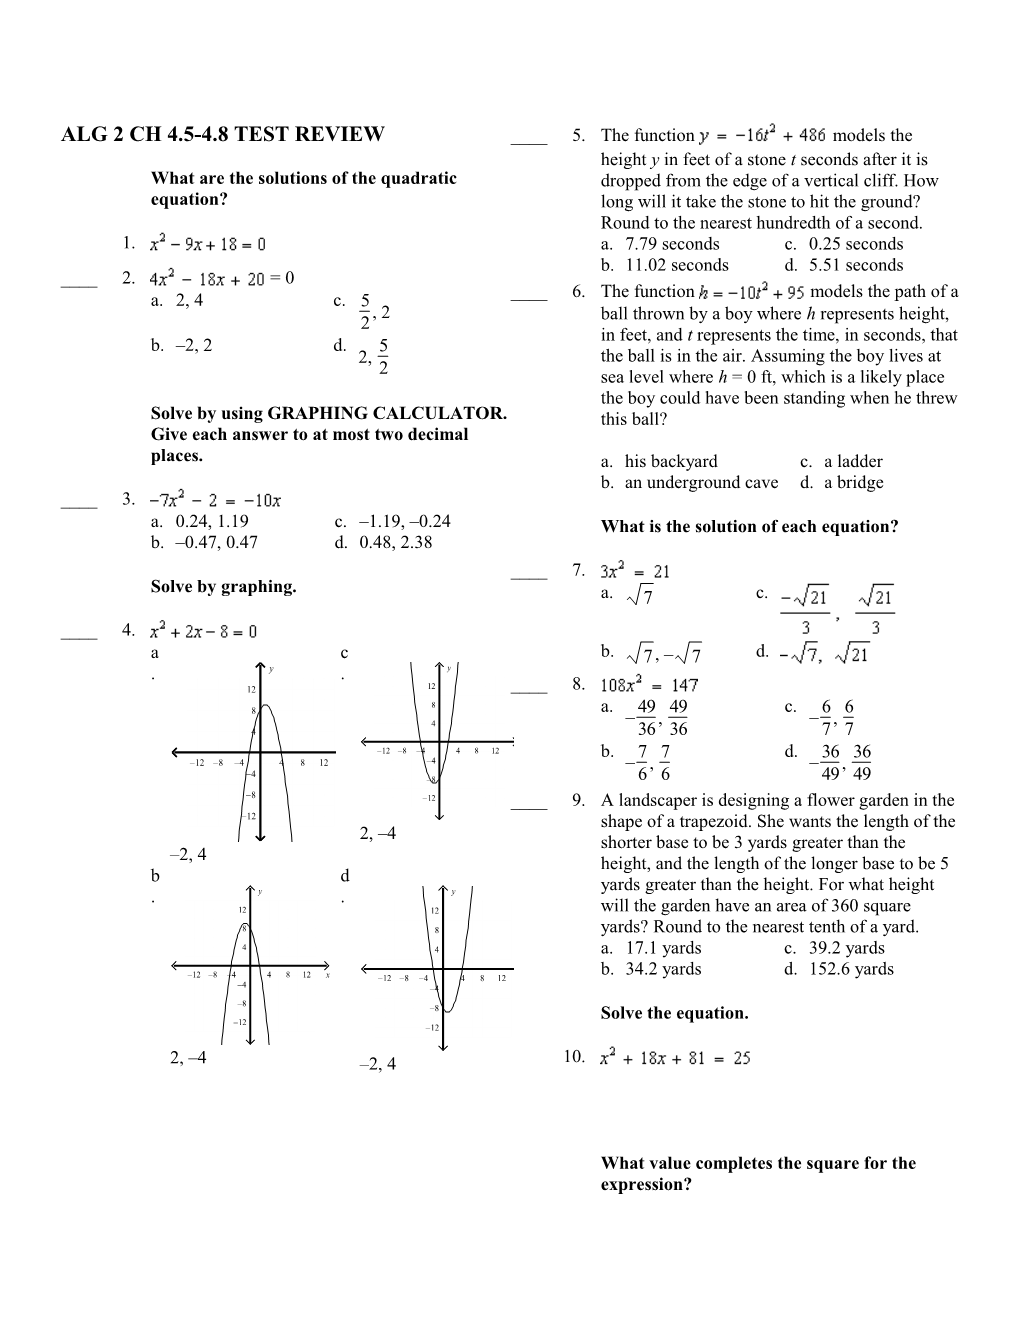 What Are the Solutions of the Quadratic Equation?